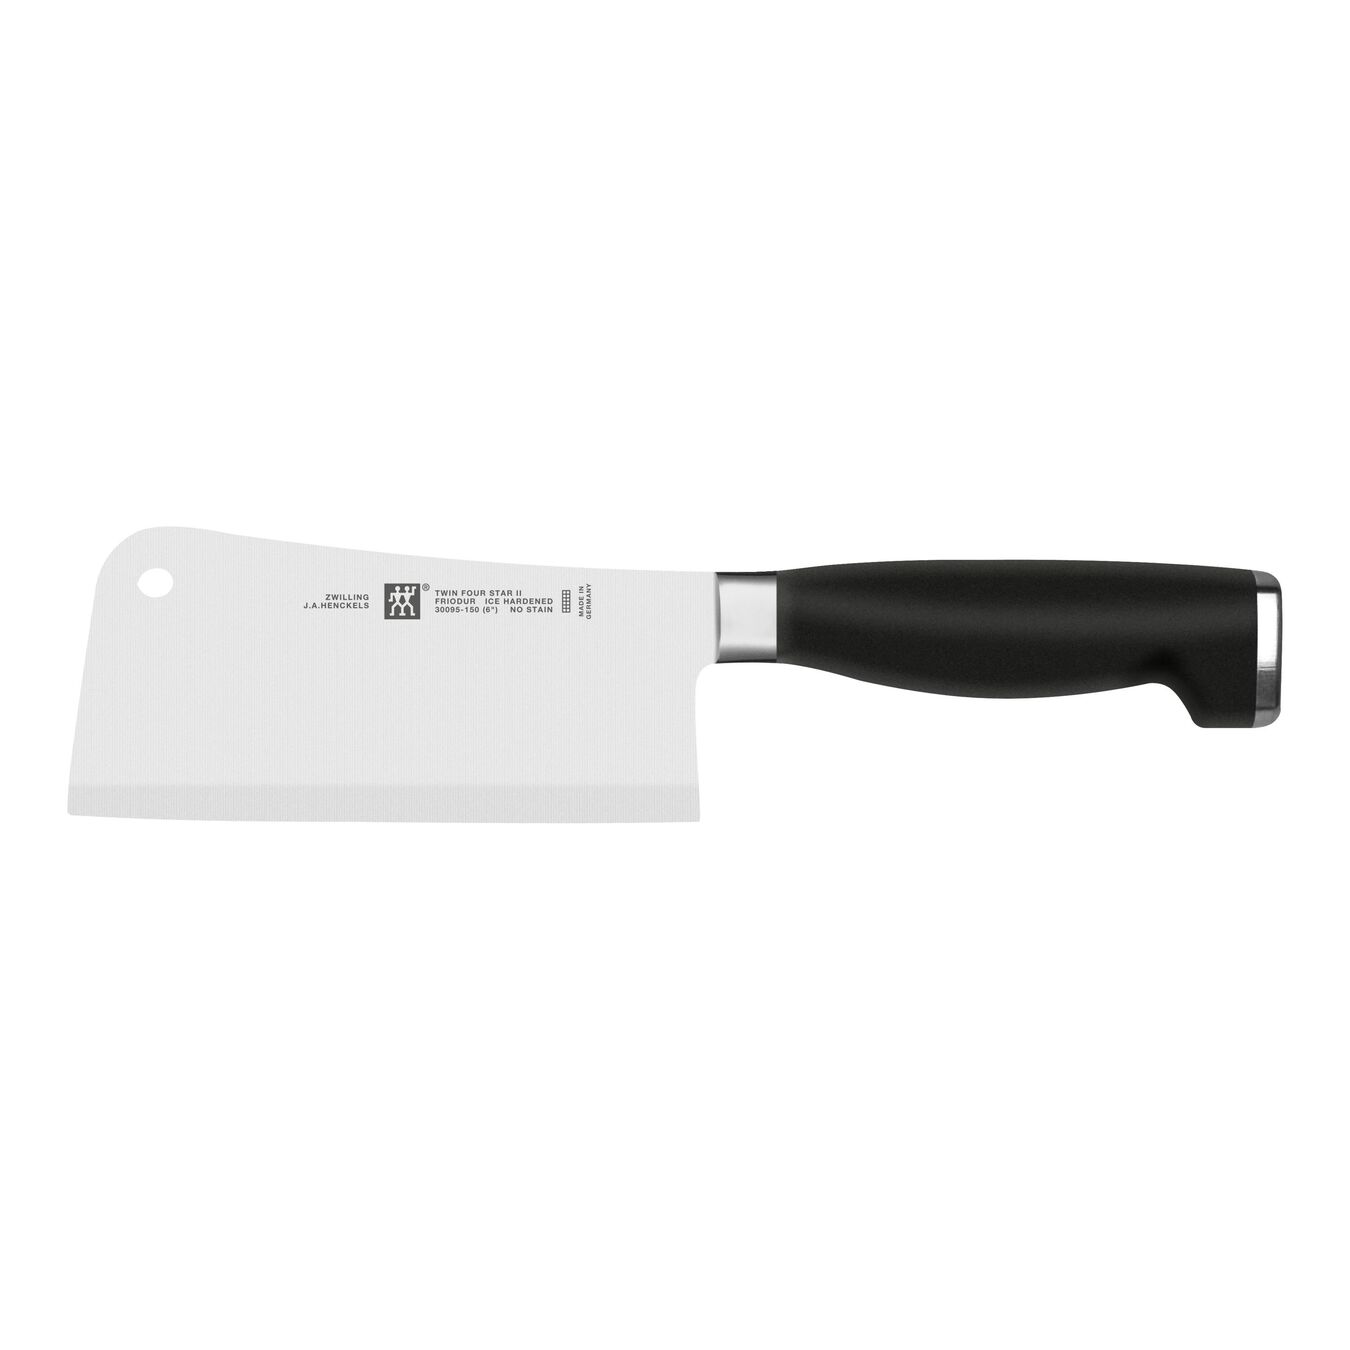 6-inch, Meat Cleaver,,large 1